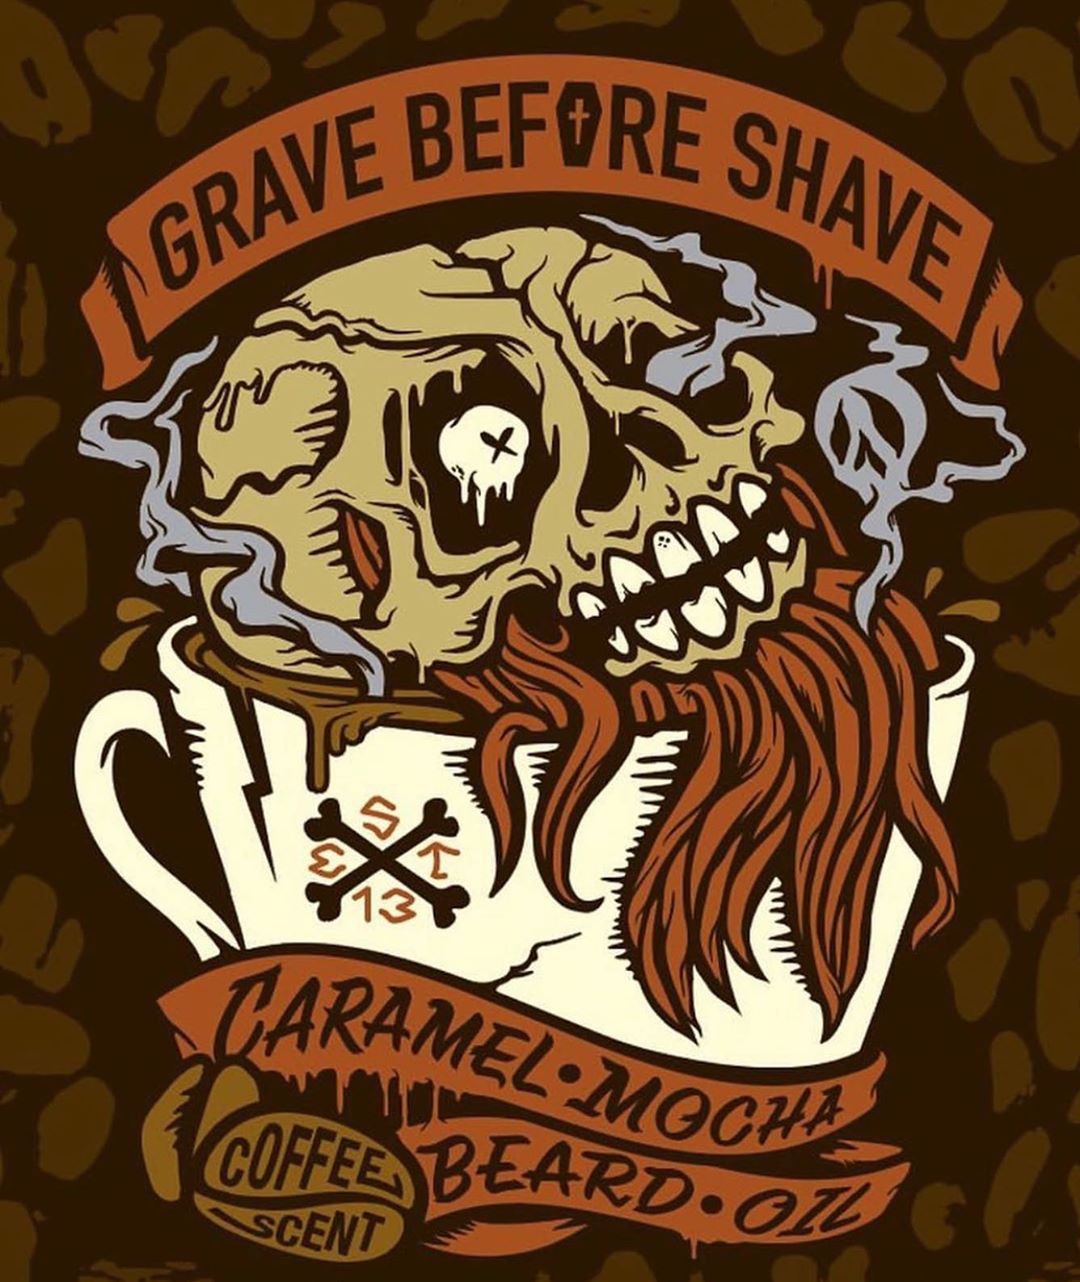 wayne bailey - Monday part deux? Wake up and smell the coffee!! Caramel Mocha Beard Oil, Balm and Butter!!
•
WWW.GRAVEBEFORESHAVE.COM
•
#GraveBeforeShave #GBS #Fisticuffs #FisticuffsMustacheWax #Caram...